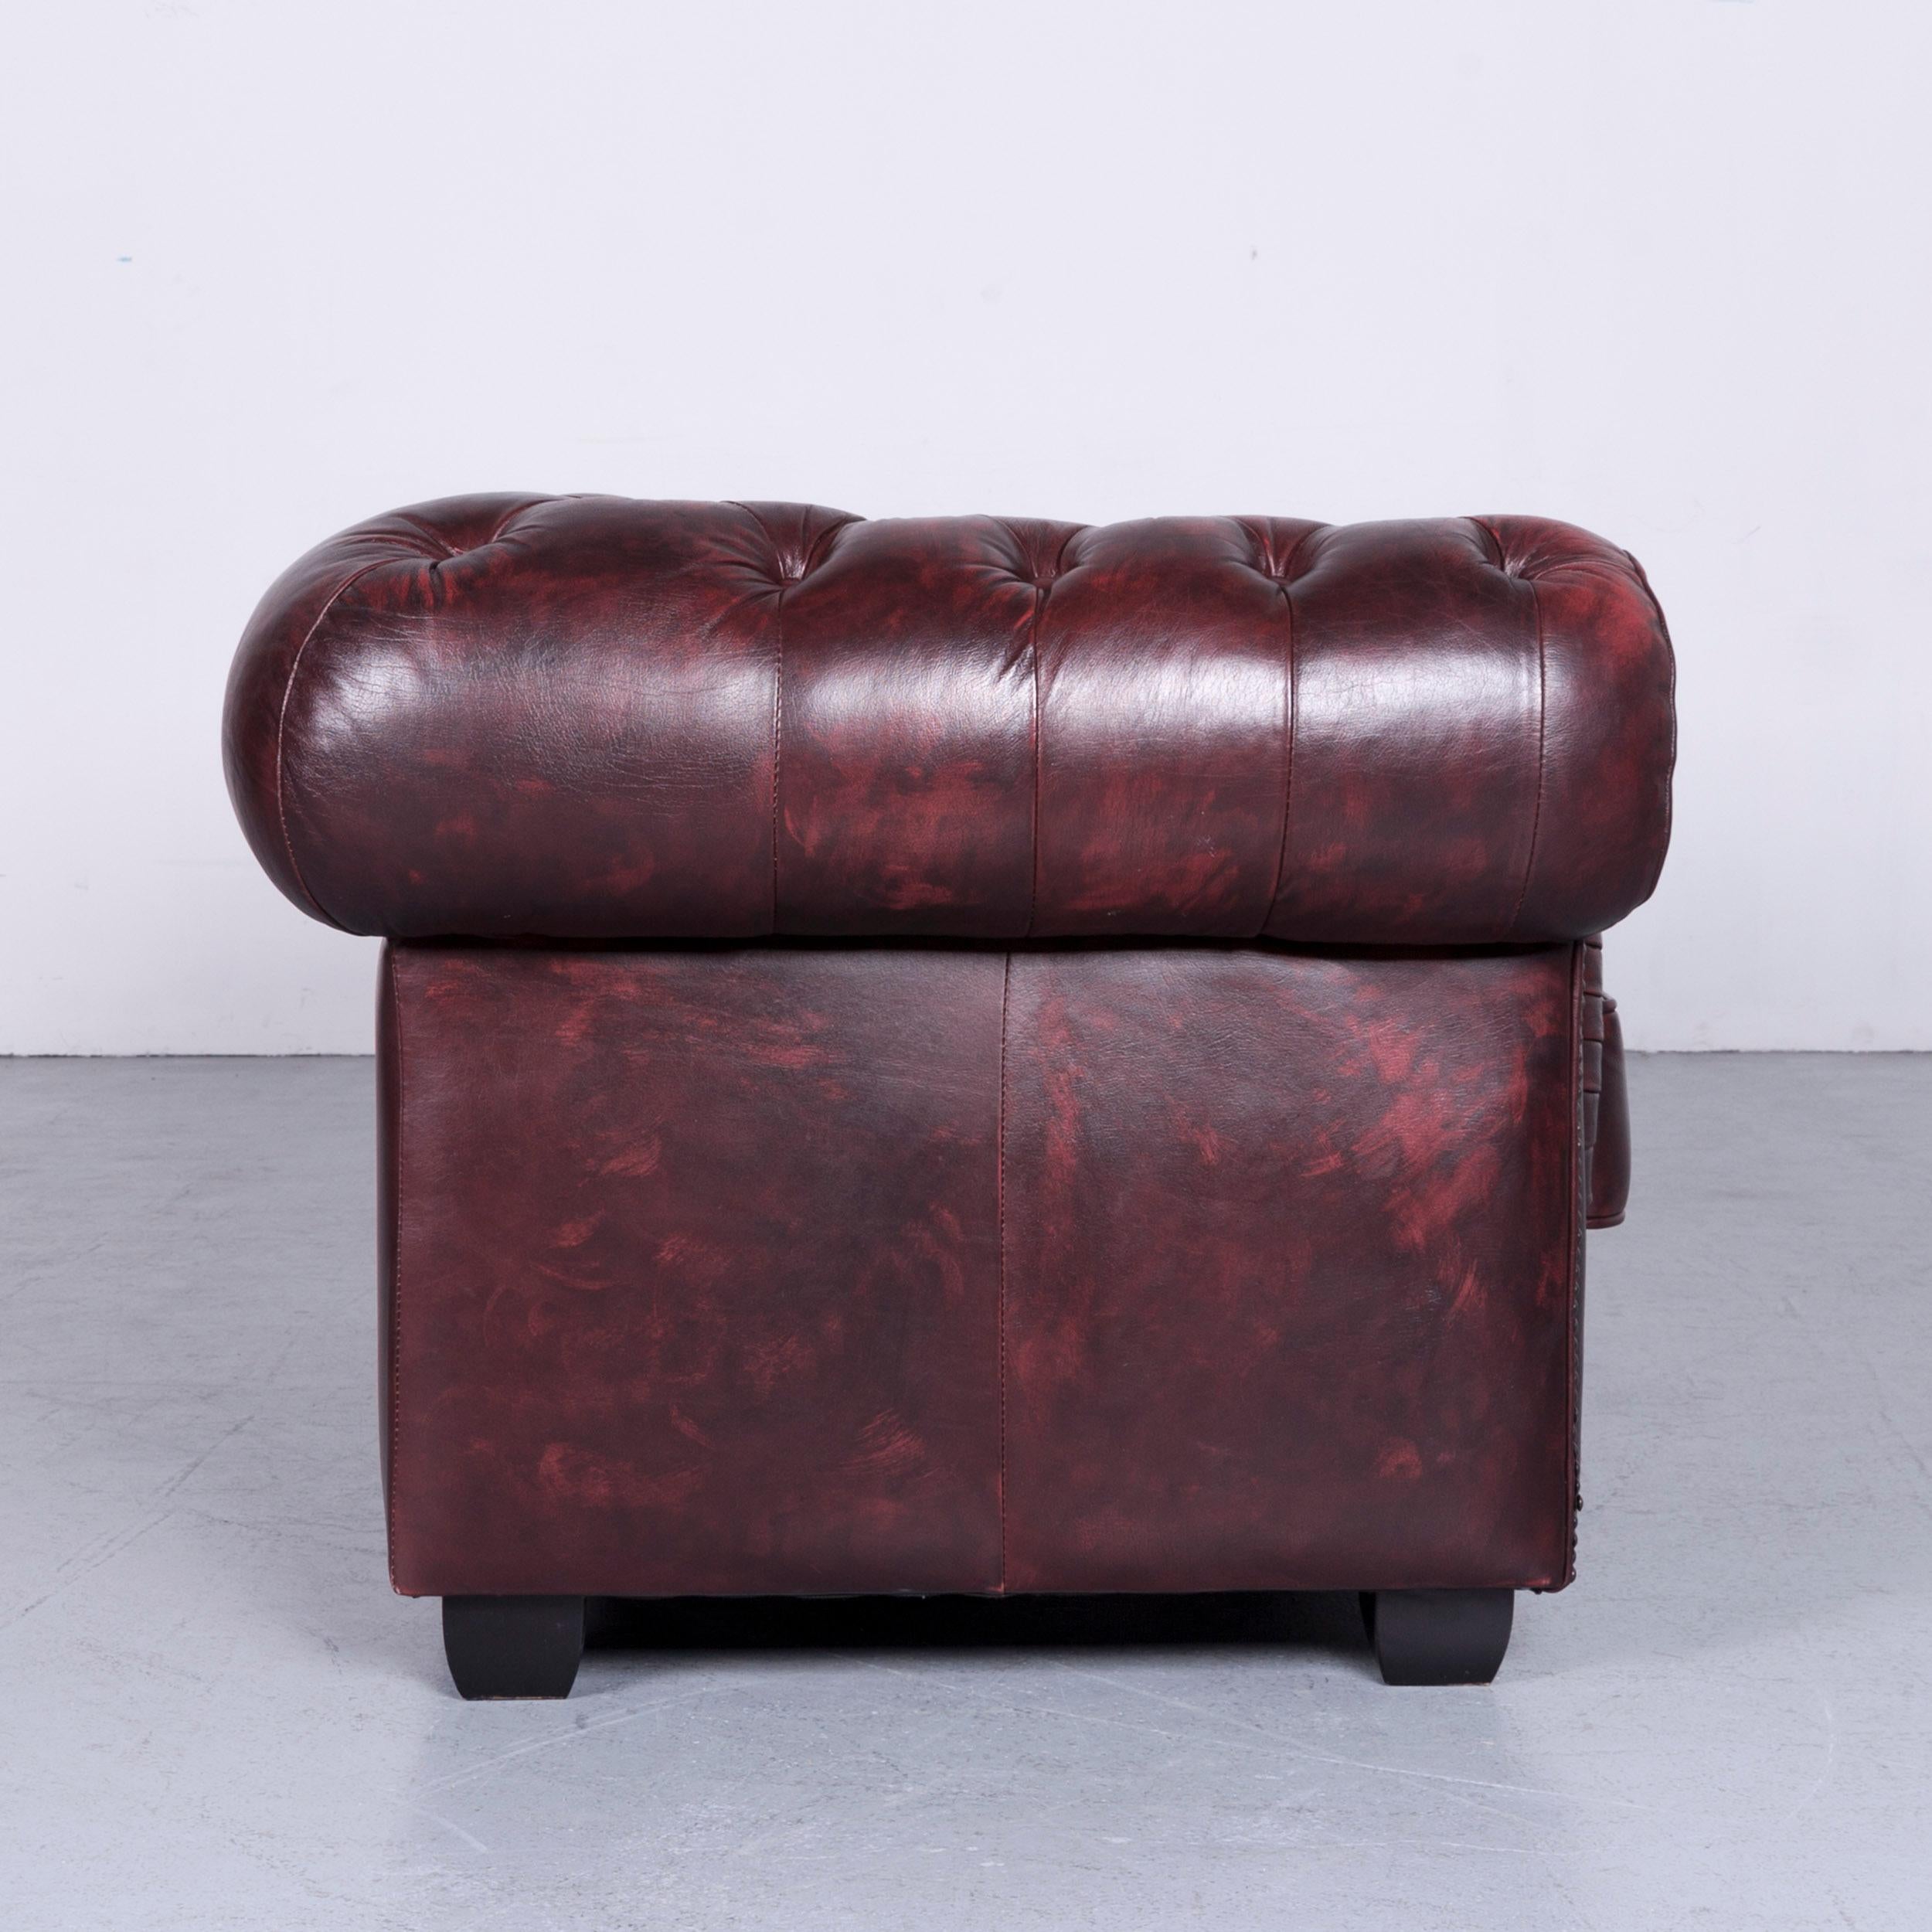 Chesterfield Leather Sofa Brown Two-Seat Couch Vintage Retro 3